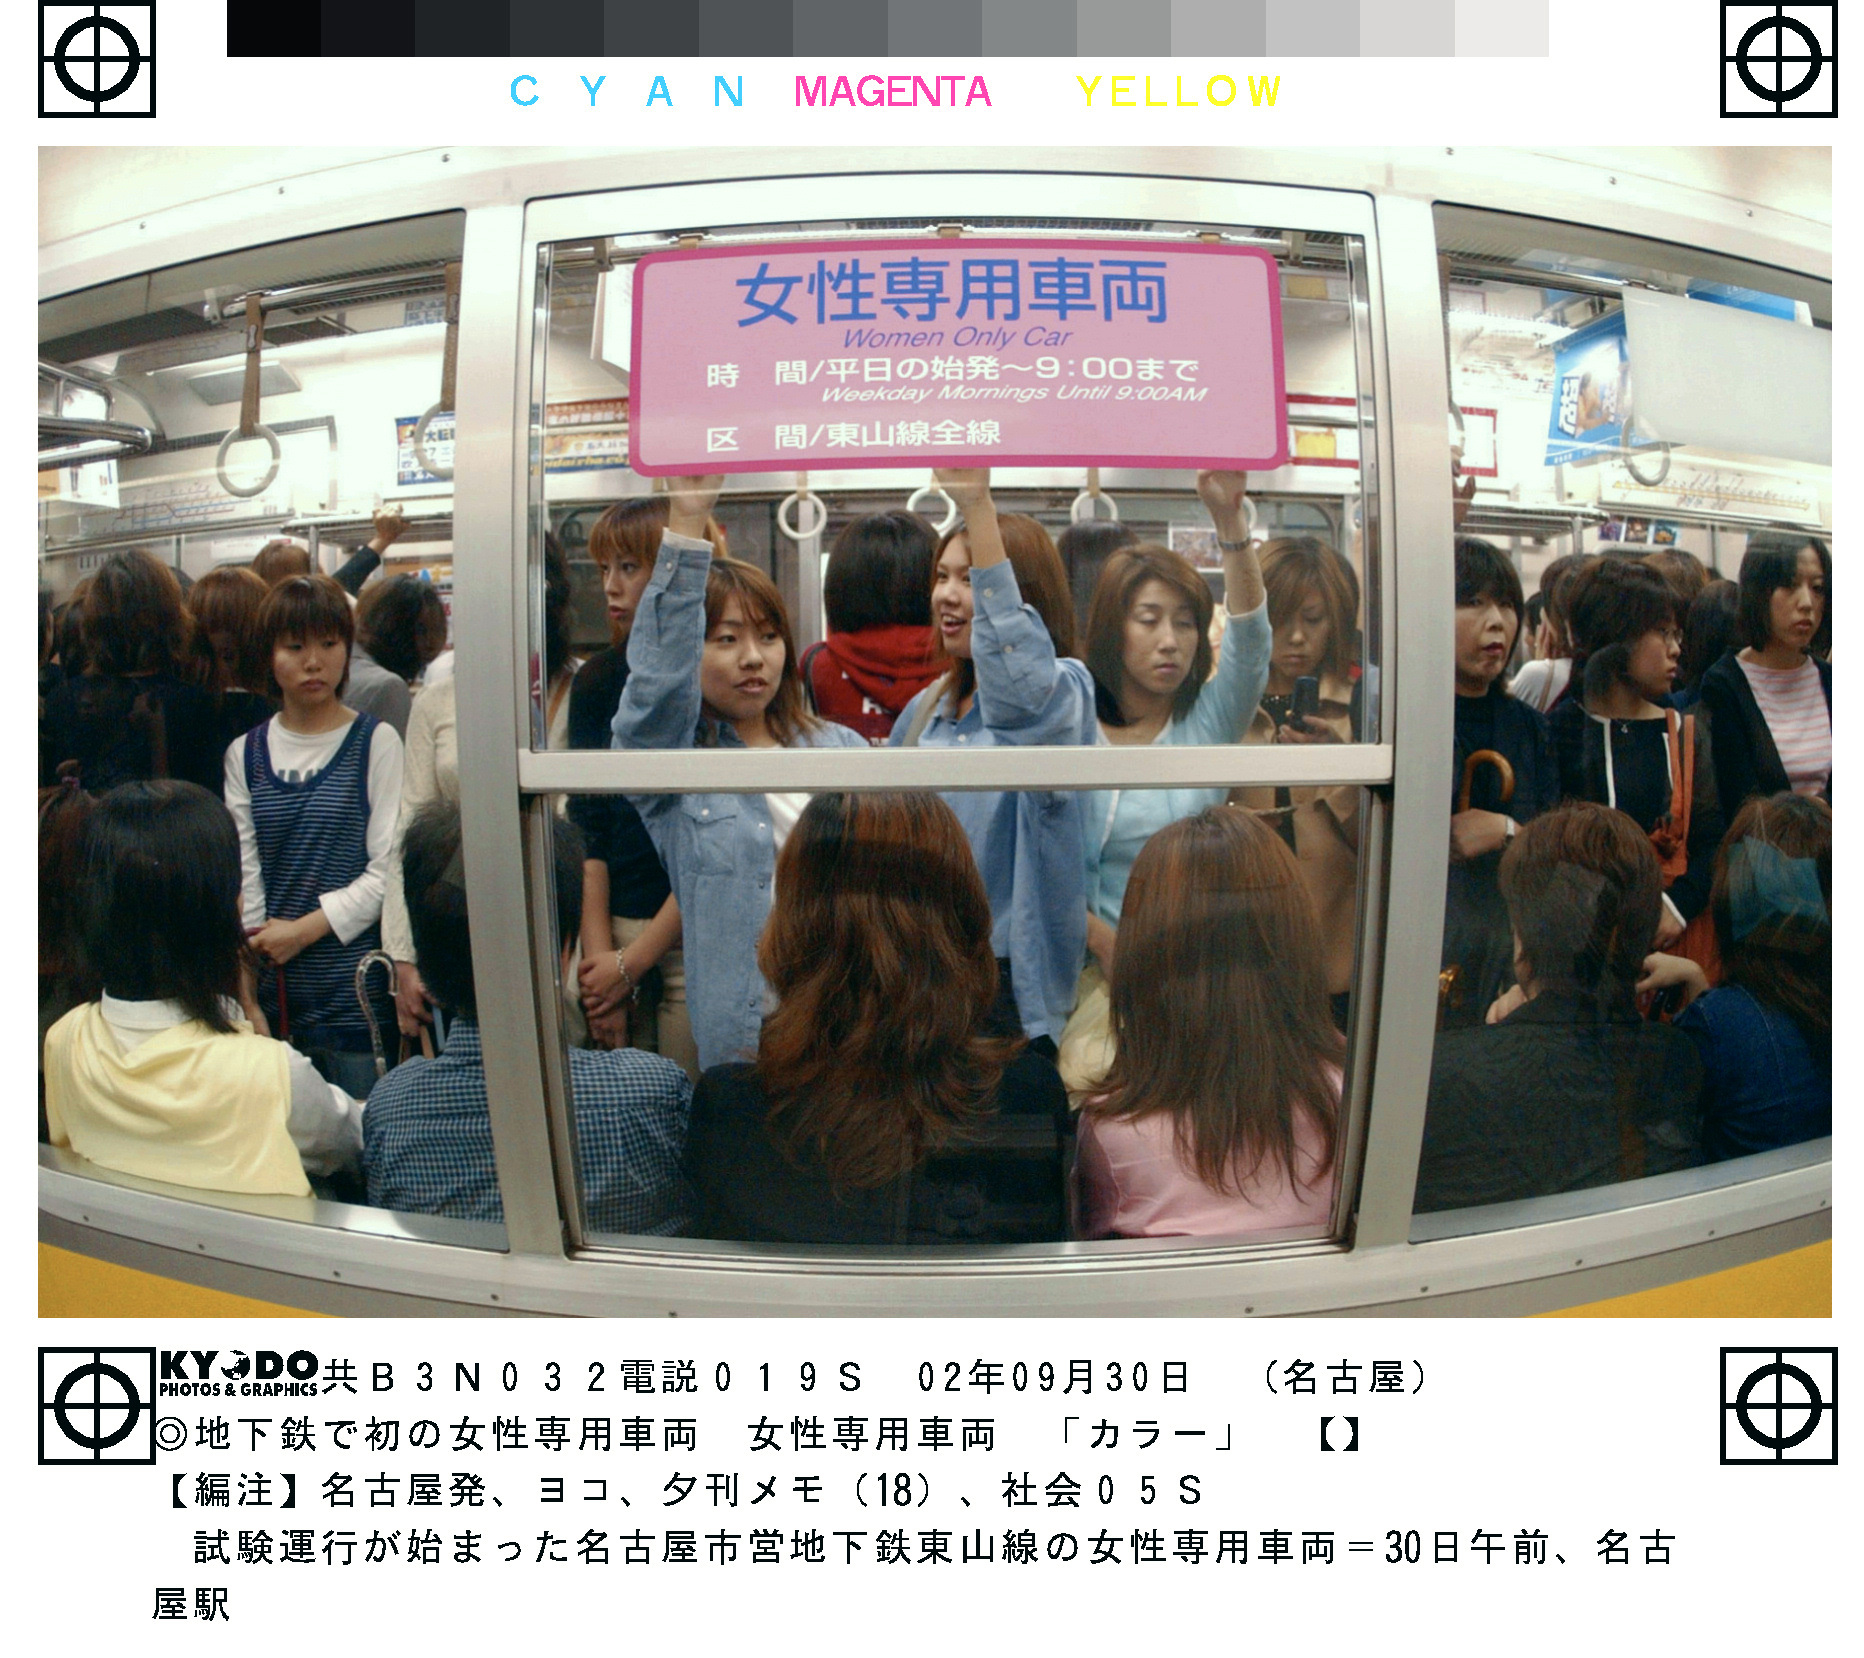 On their own: Commuters stand in a women-only carriage of a train car on the Higashiyama Subway Line at Nagoya Station in 2002. The subway line was the first of its kind to begin operating such a service as a way to deal with the problem of groping by men on train carriages. Critics argue that women-only carriages are not a real solution. | KYODO